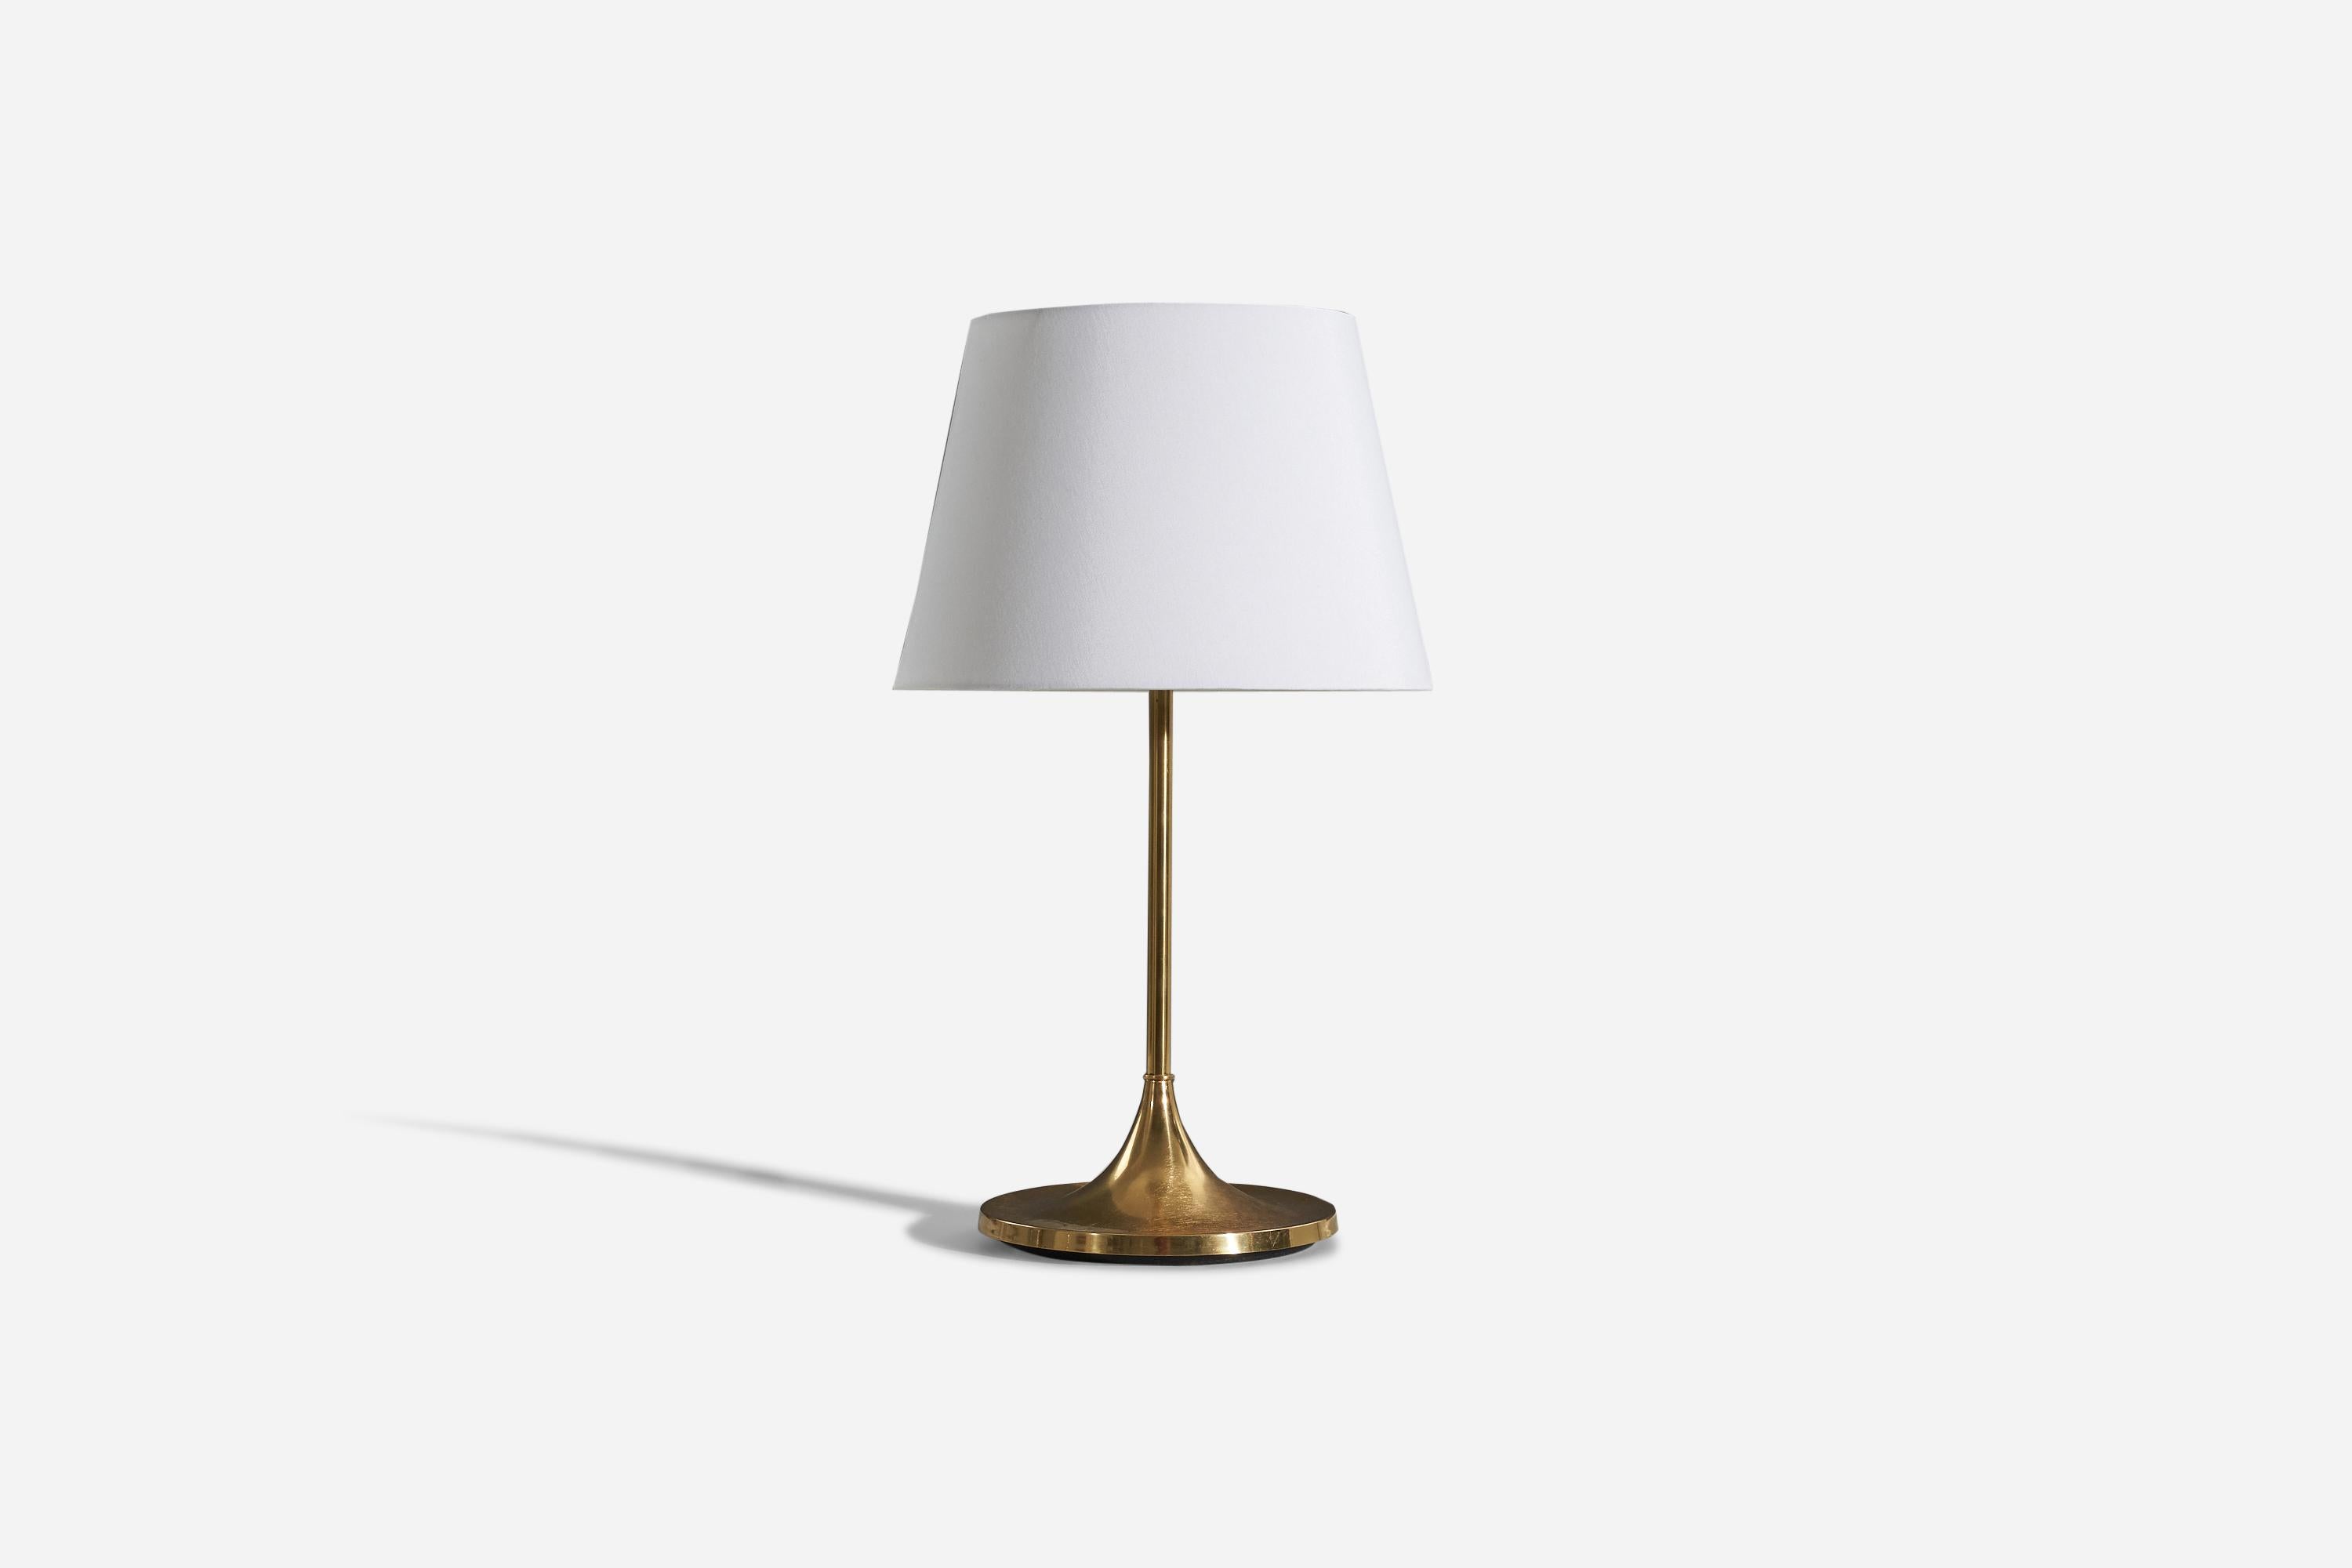 A brass table lamp designed and produced by a Swedish designer, Sweden, c. 1960s.

Sold without lampshade. 
Dimensions of Lamp (inches) : 18.125 x 9.625 x 9.625 (H x W x D)
Dimensions of Shade (inches) : 10 x 14.125 x 10 (T x B x S)
Dimension of